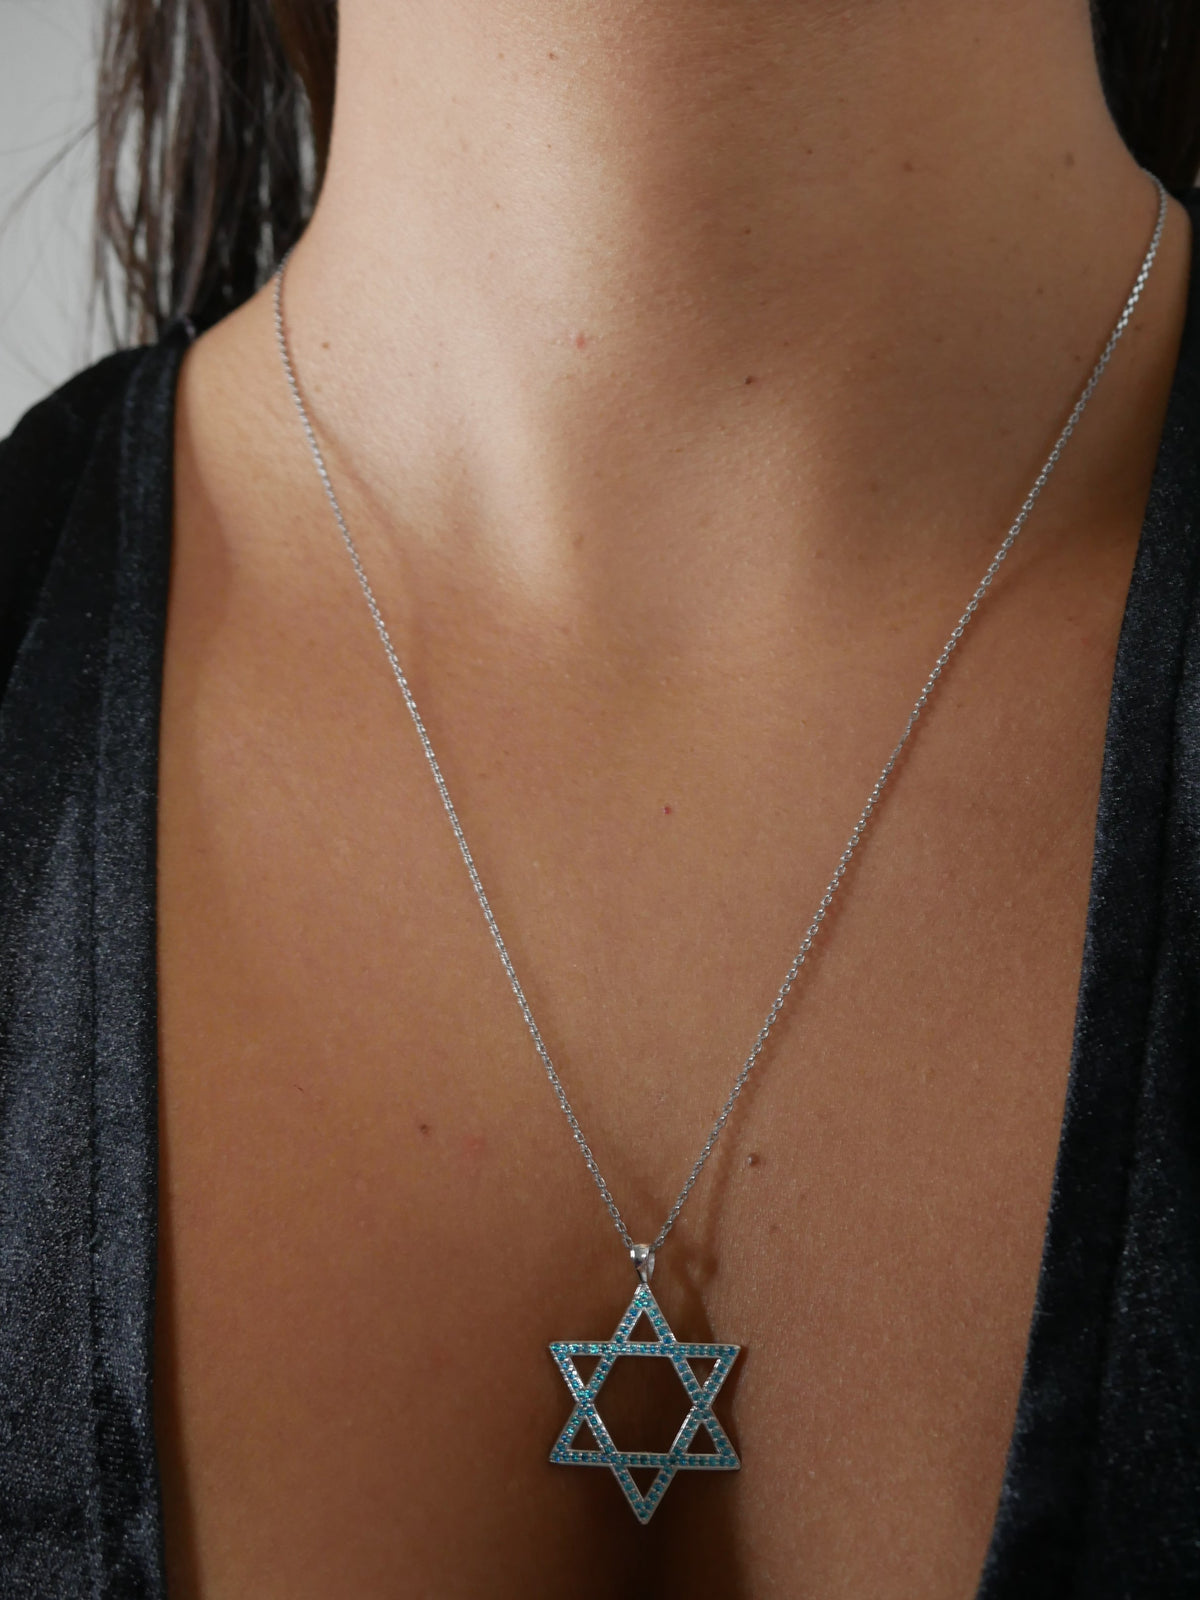 necklace, necklaces, star of david necklace, star of david pendants, cute star of david necklaces, big star of david necklaces, religious jewelry, jewelry website, cute necklaces, nice jewelry, holiday gifts, birthday gifts, anniversary gifts, statement necklaces, statement jewelry, cute necklaces, holiday necklaces, pendats